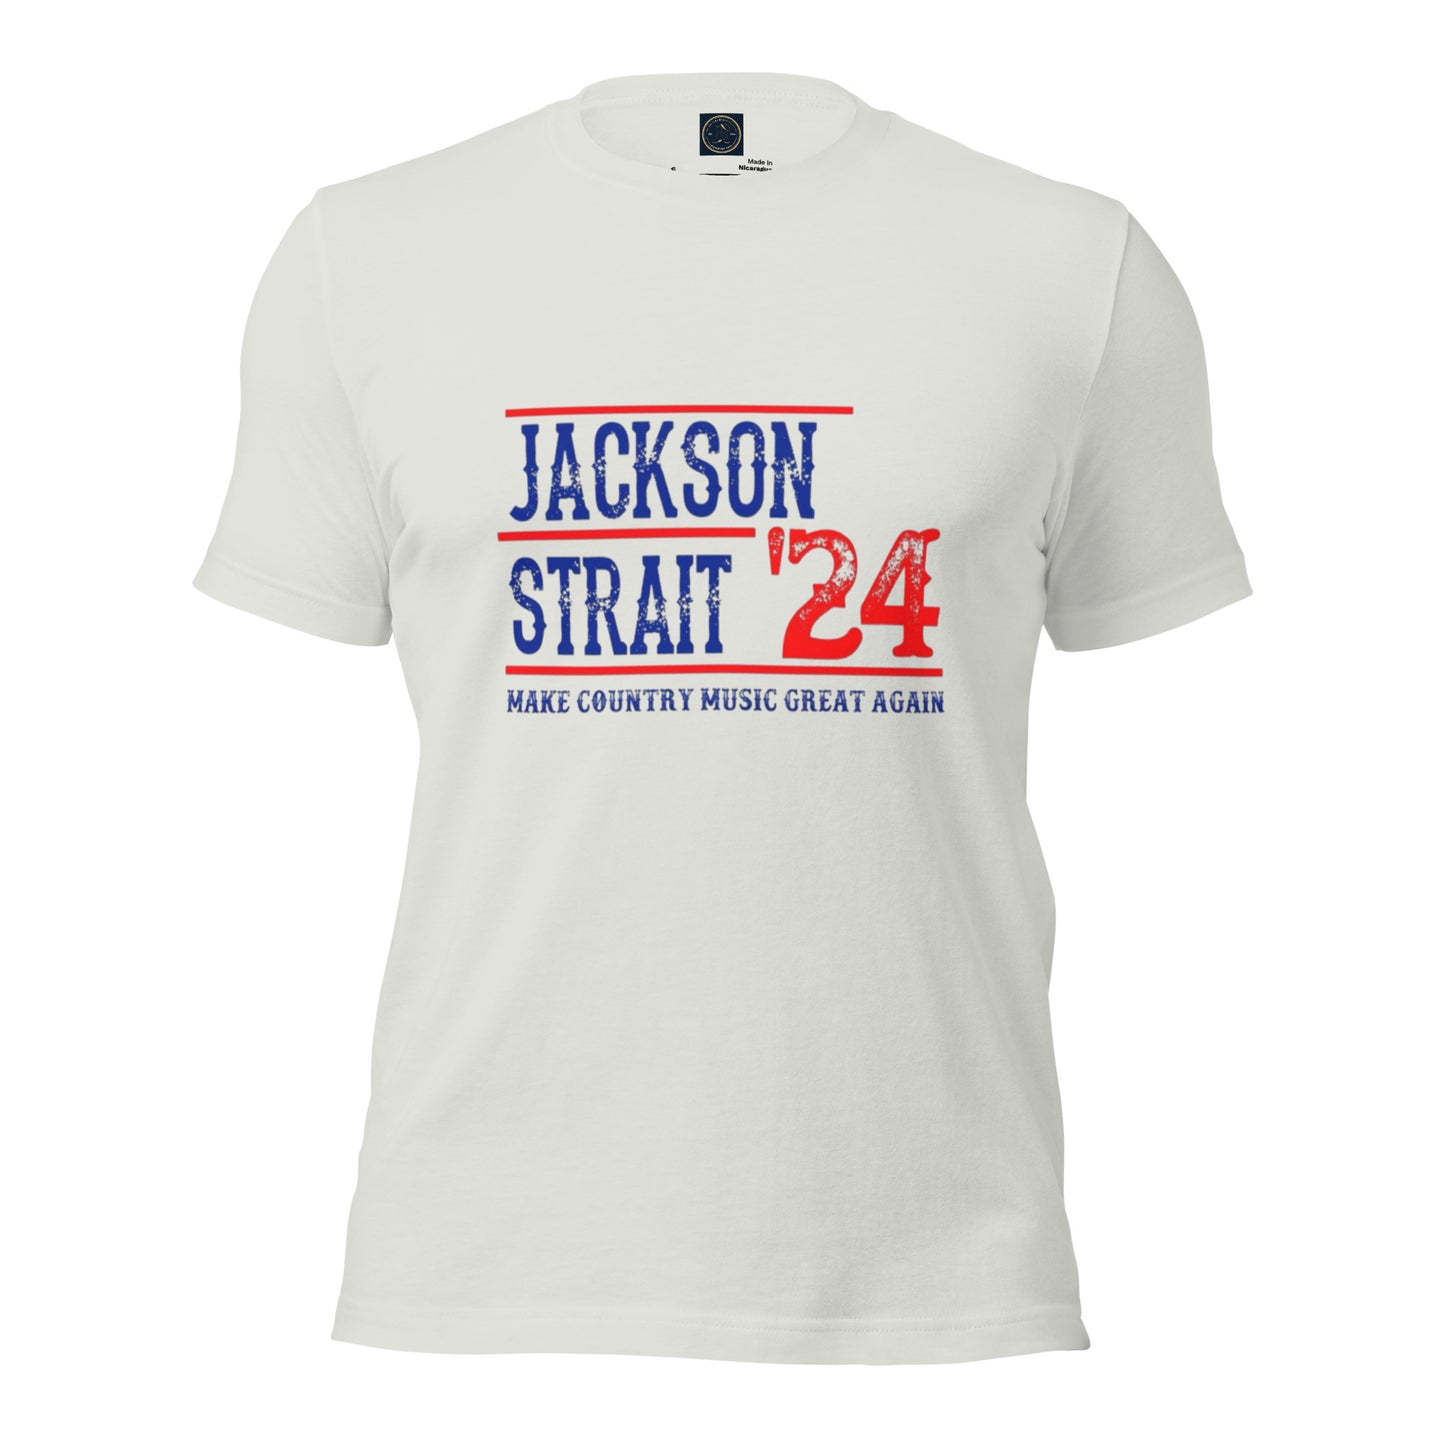 Jackson & Strait - Classic Country Tees